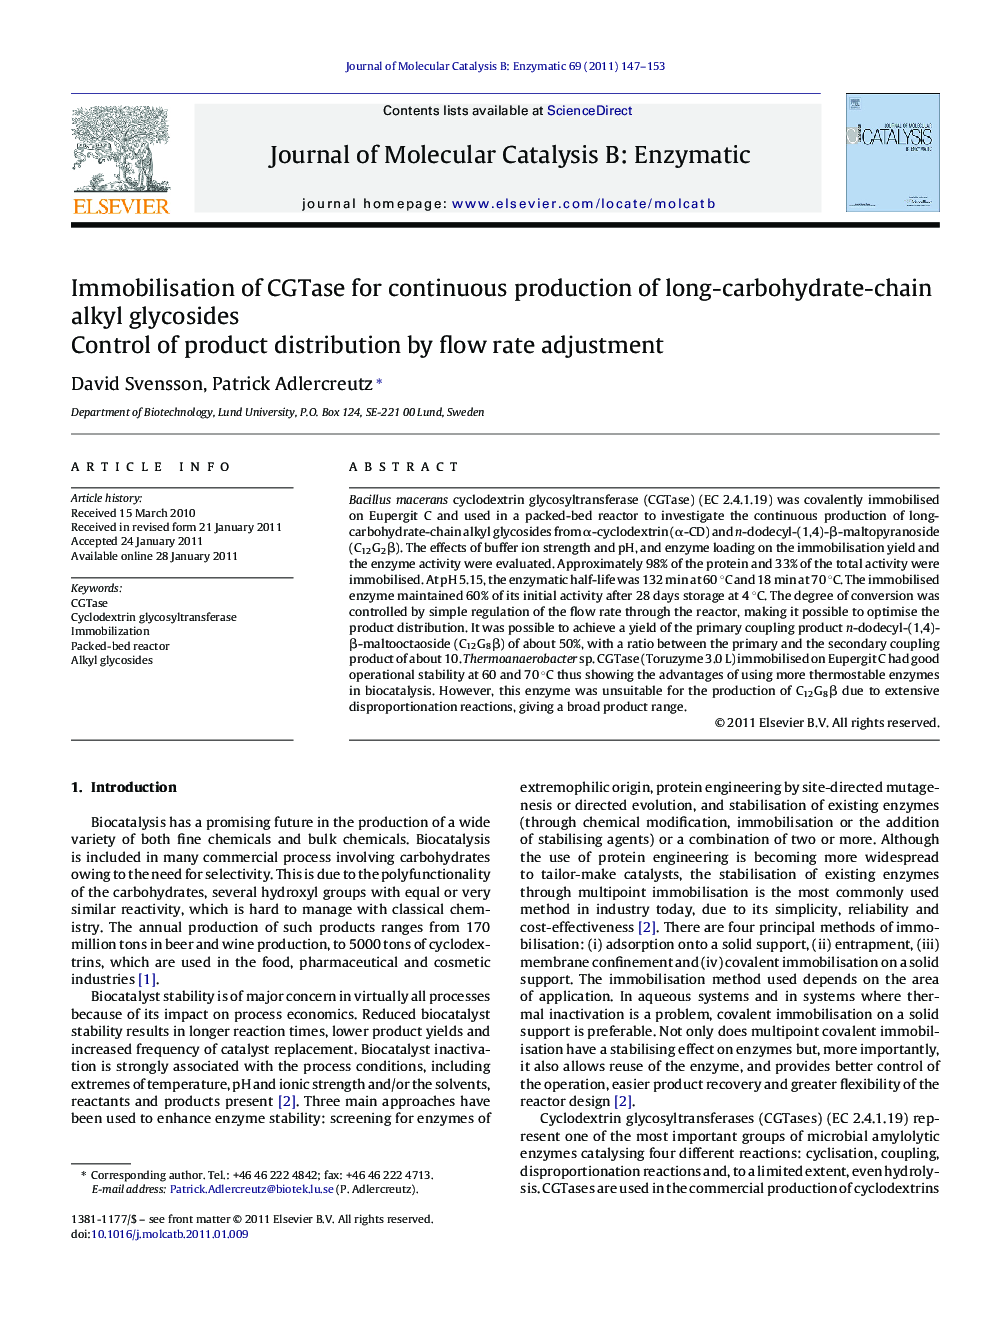 Immobilisation of CGTase for continuous production of long-carbohydrate-chain alkyl glycosides: Control of product distribution by flow rate adjustment